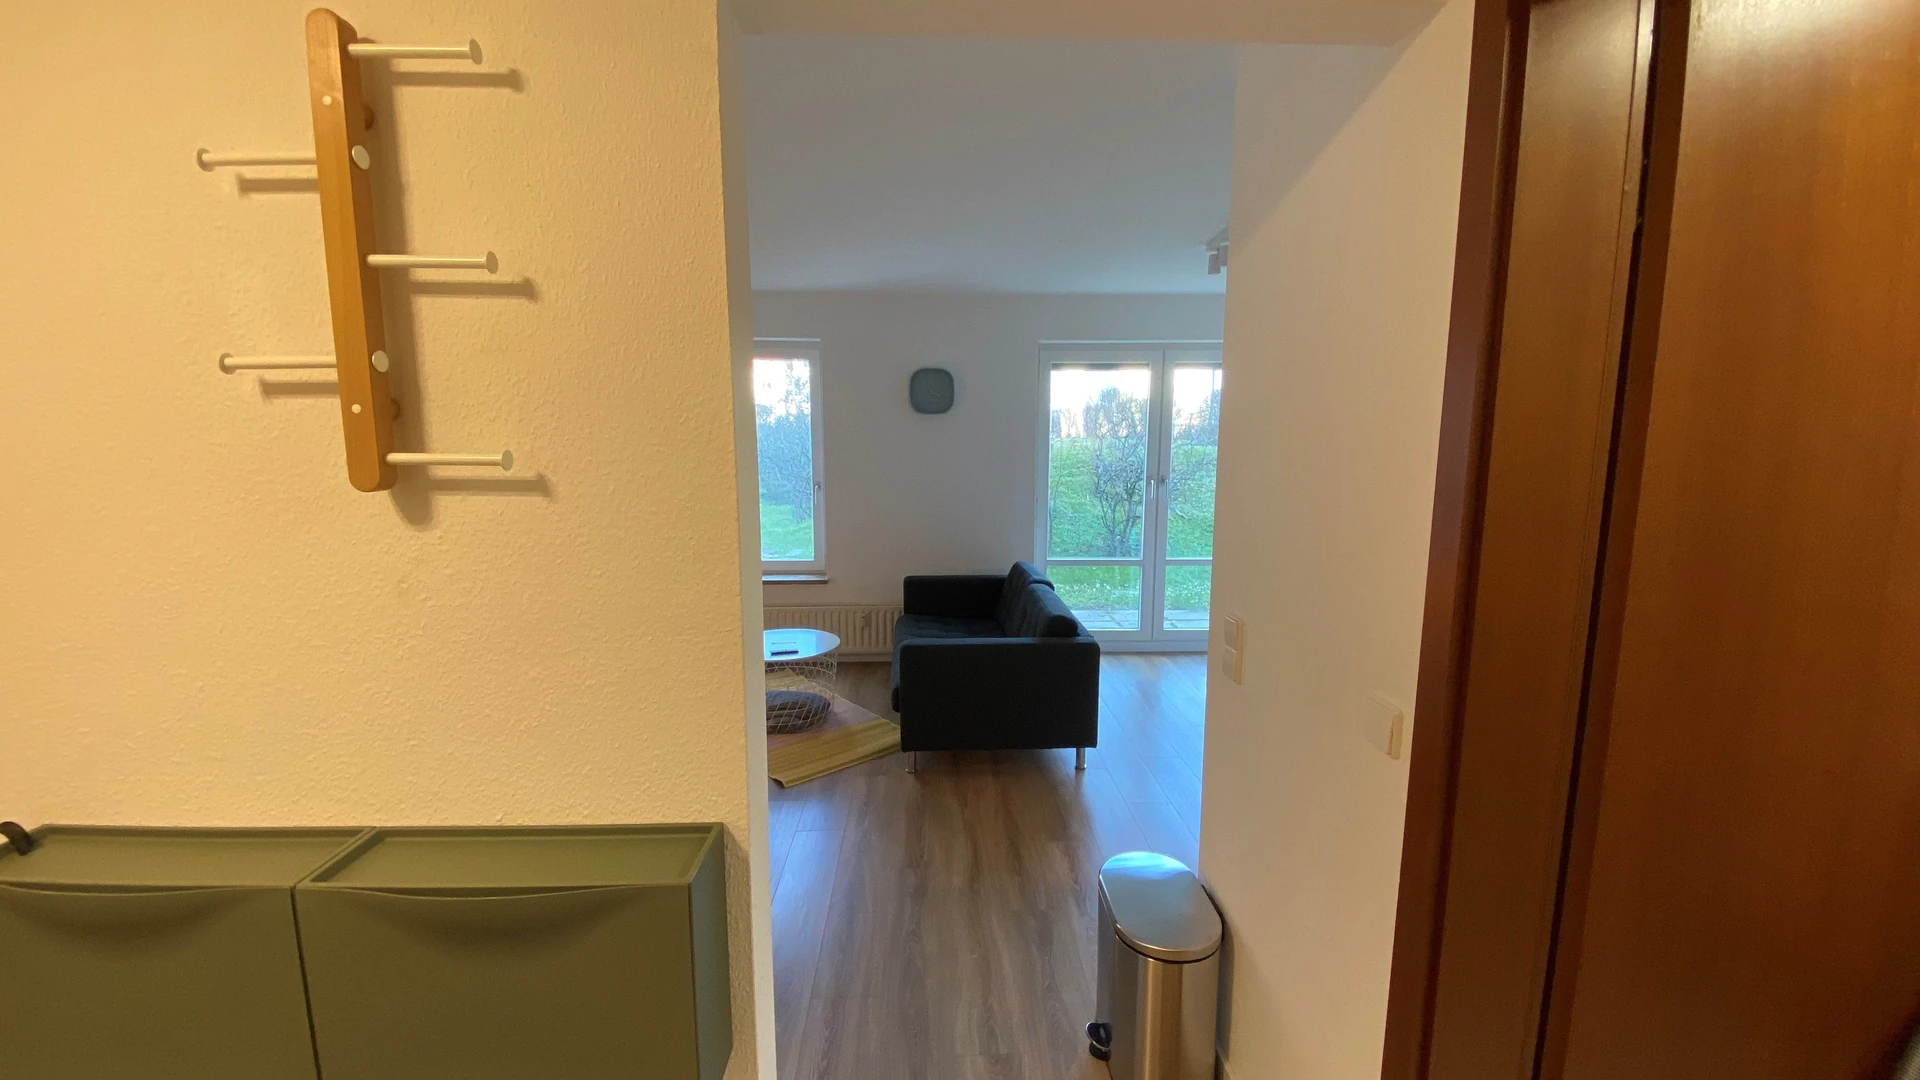 Room for rent in a shared flat in Dresden